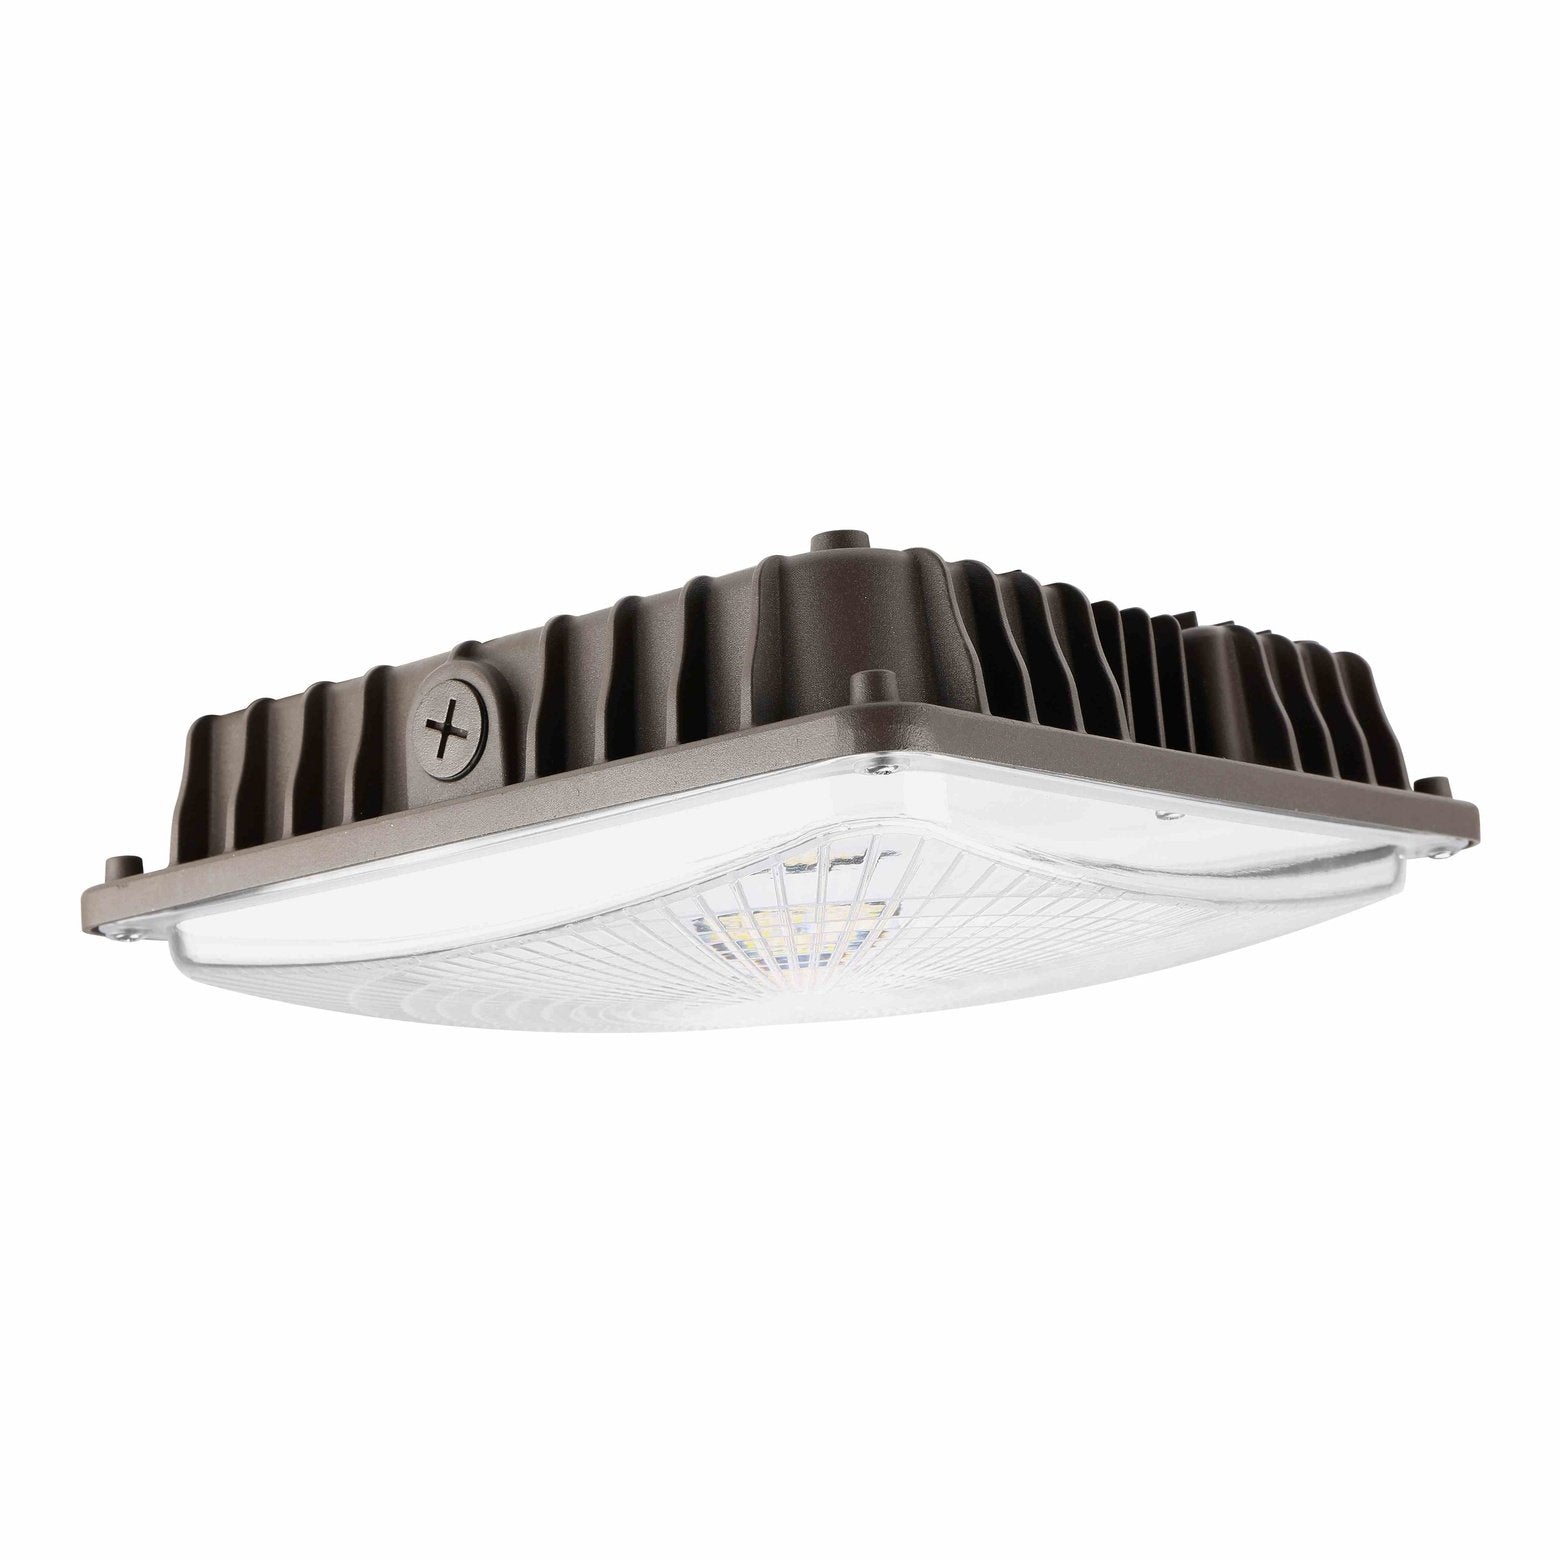 CP05 LED Canopy Light 60W, 8000 Lumens 120-277VAC Dimmable 4000K - Dark Bronze, Clear Lens